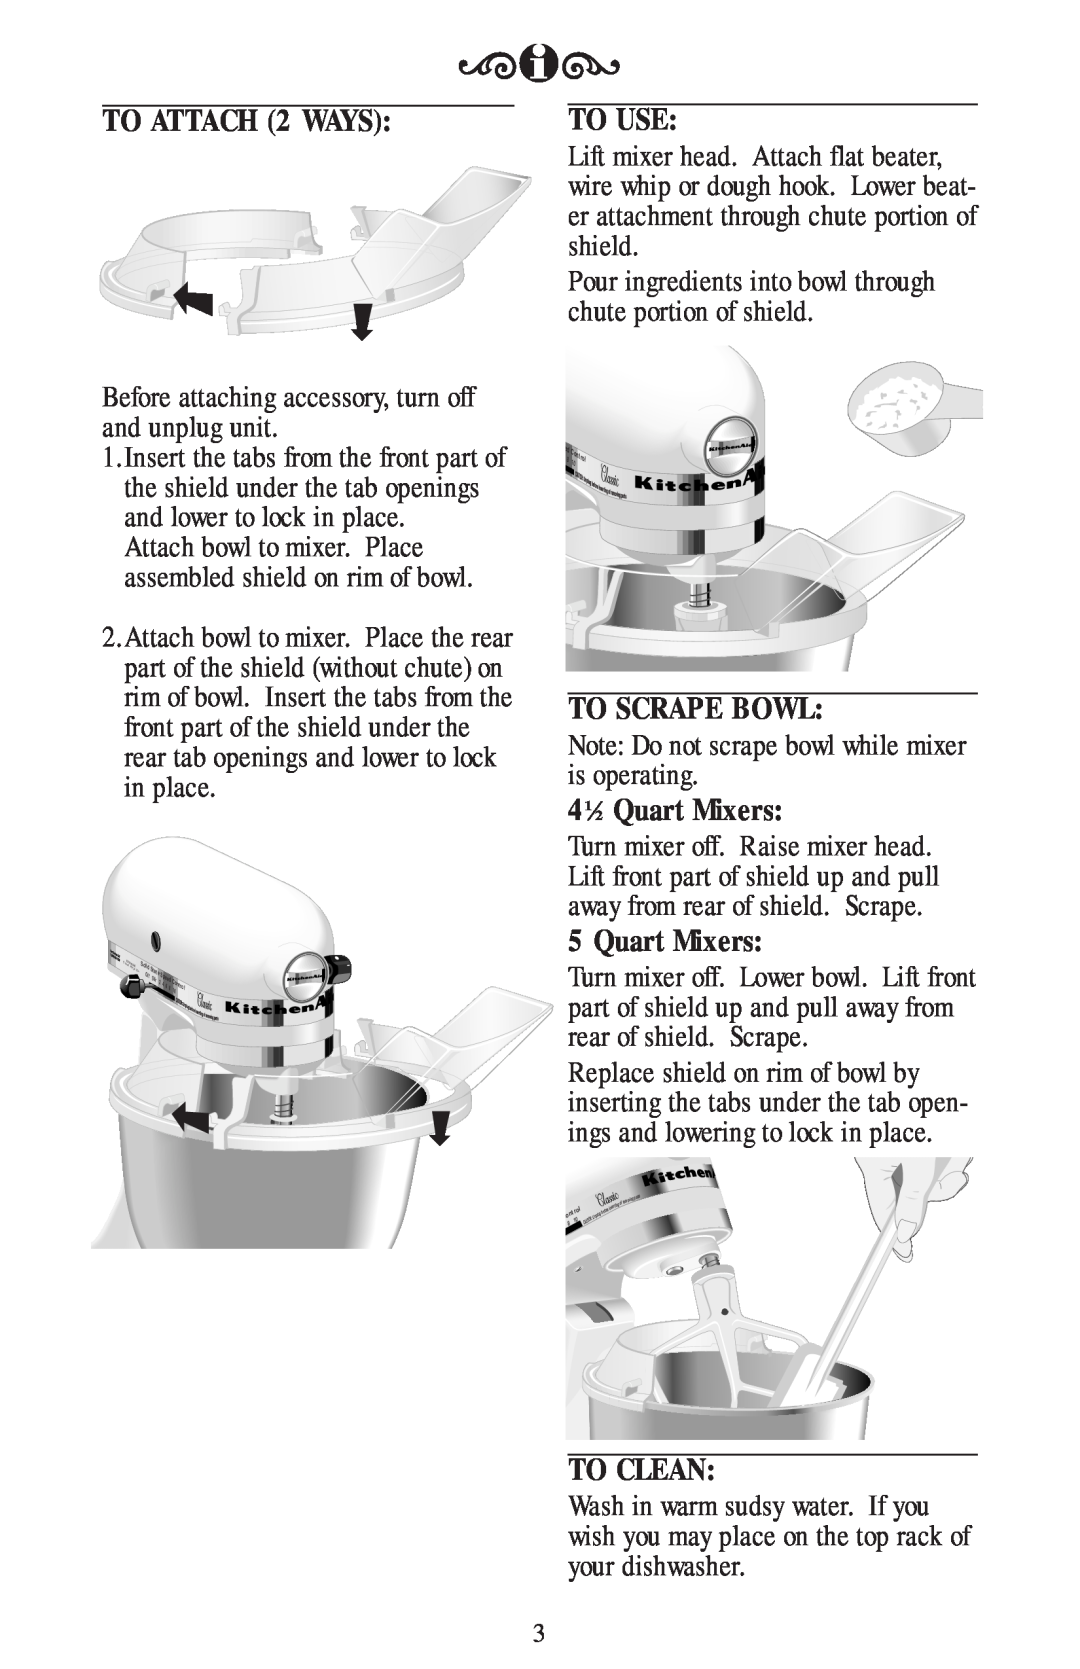 KitchenAid KPS2CL manual TO ATTACH 2 WAYS, To Use, To Scrape Bowl, 41⁄2 Quart Mixers, To Clean 